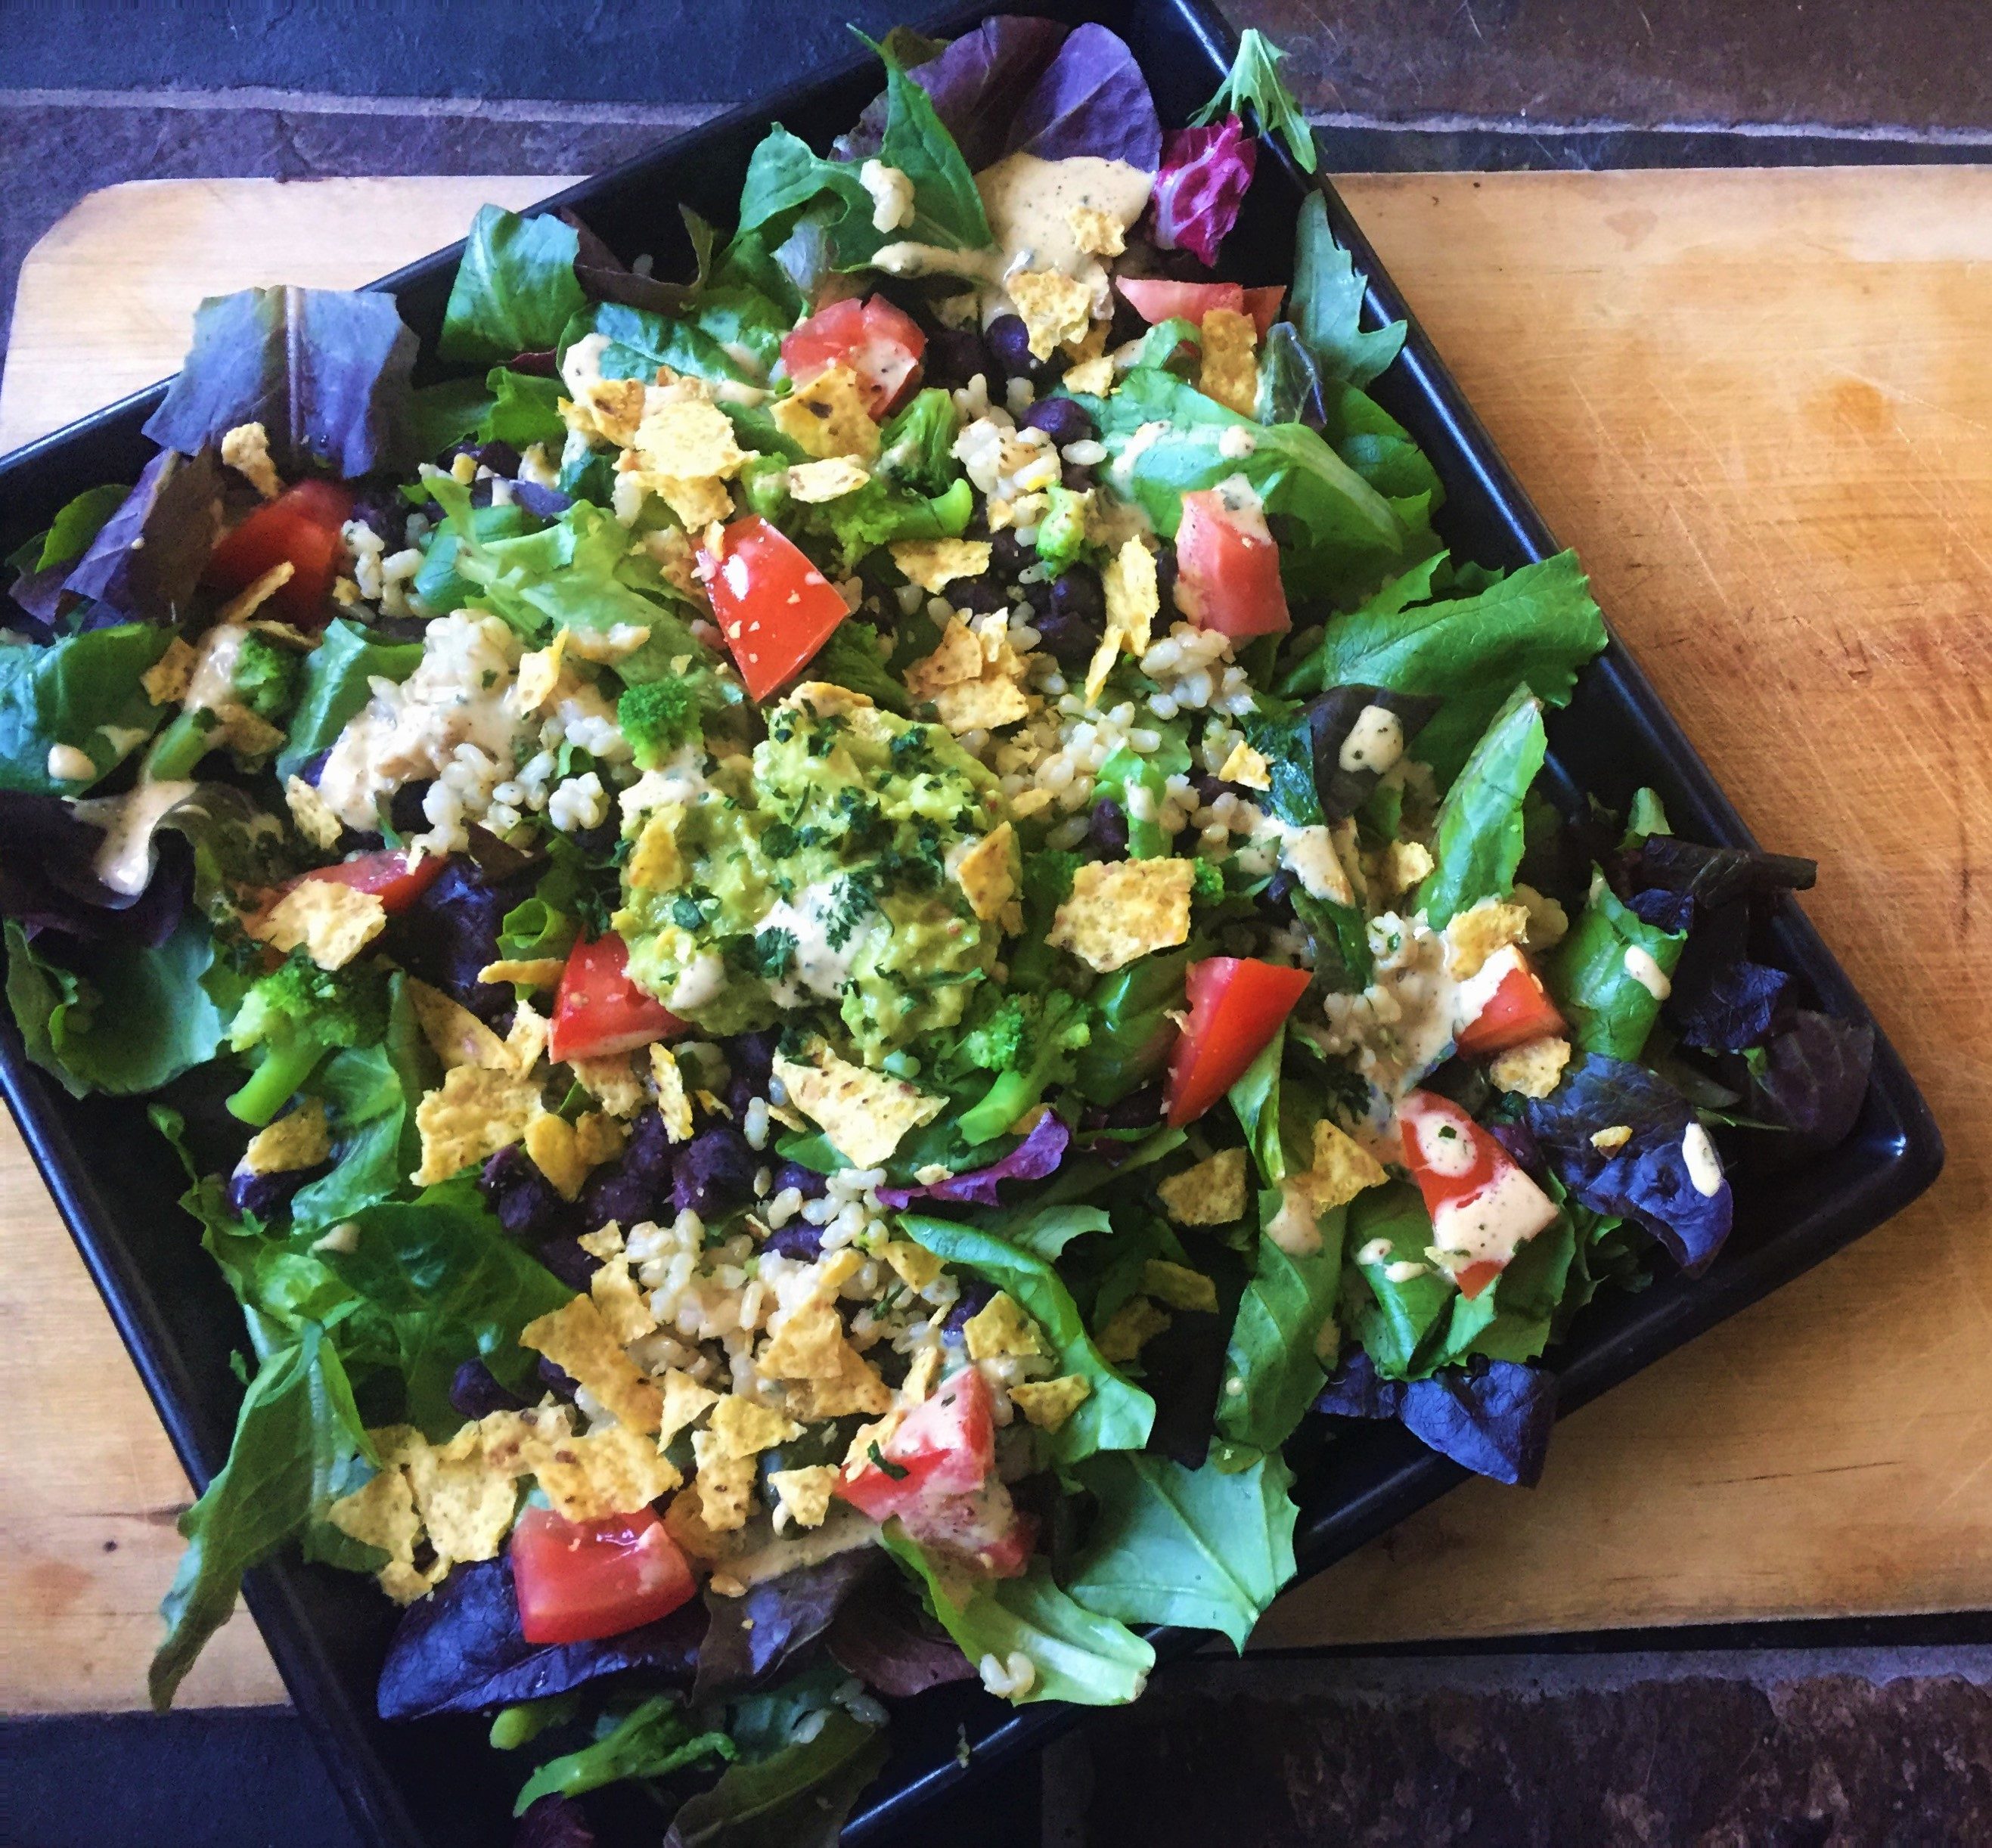 Fiesta Burrito Salad with Cheesy Chipotle Lime dressing recipe courtesy of the Vegan Fit Carter food and fitness blog